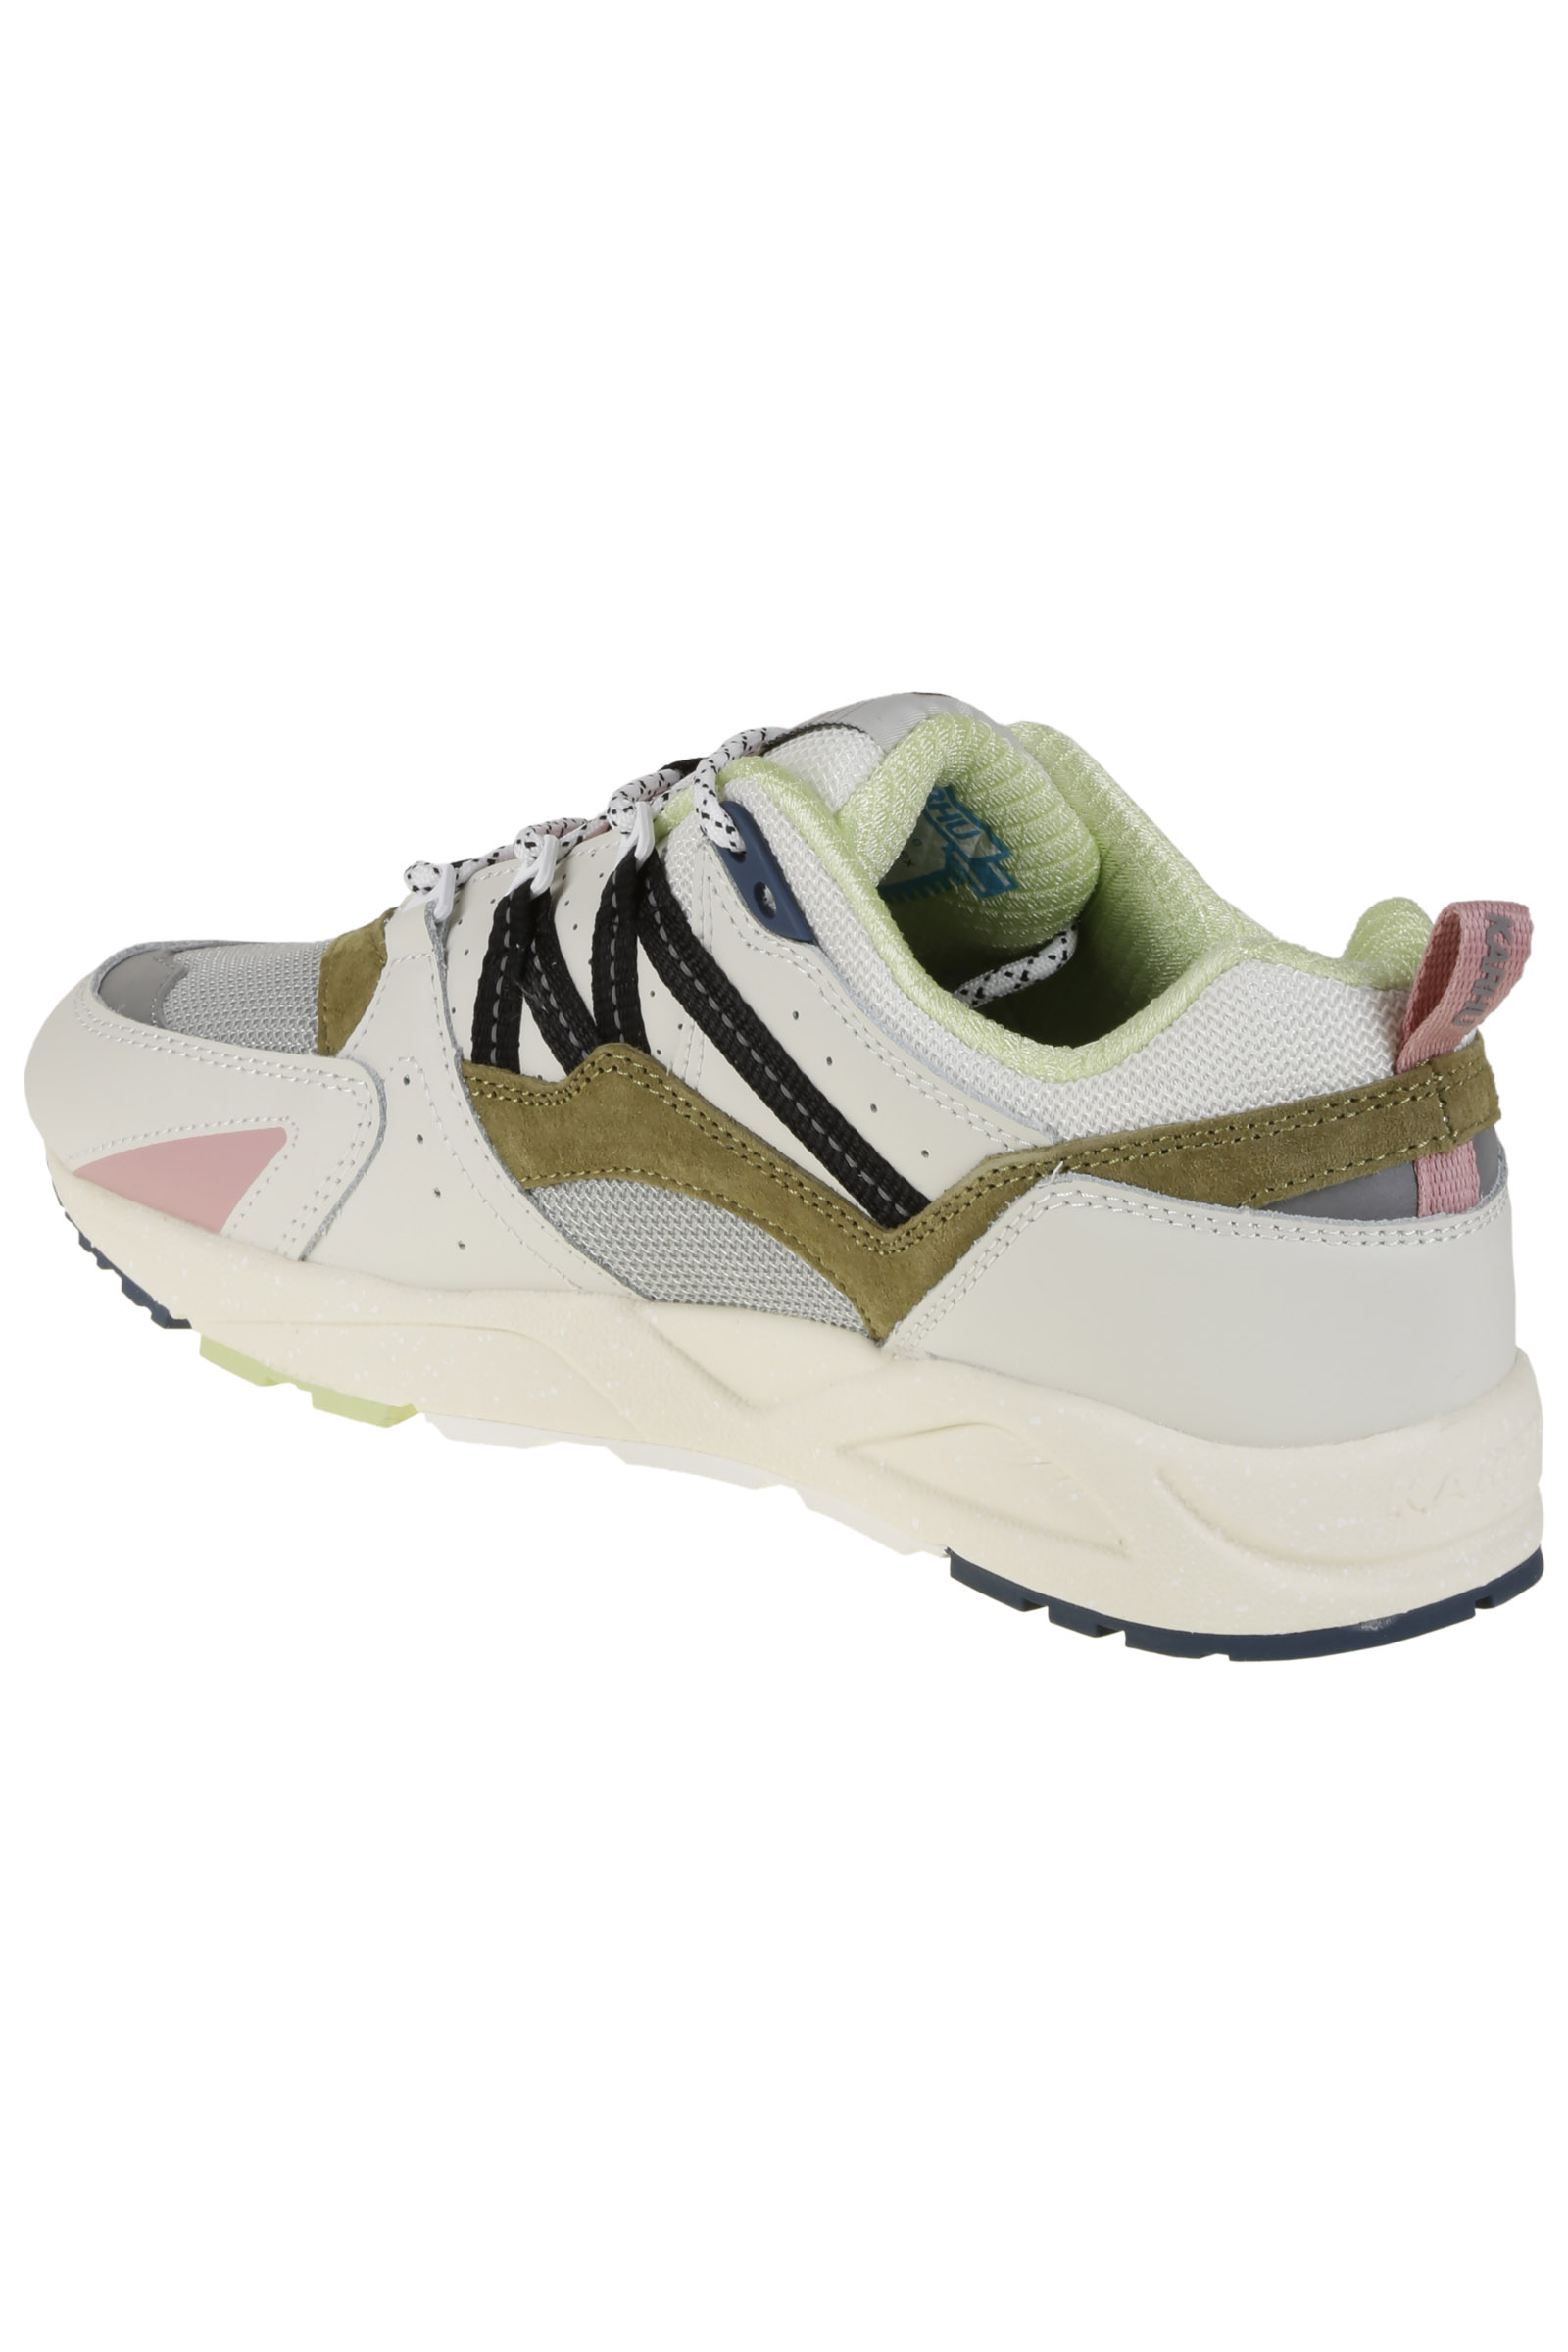 Picture of Karhu | Fusion 2.0